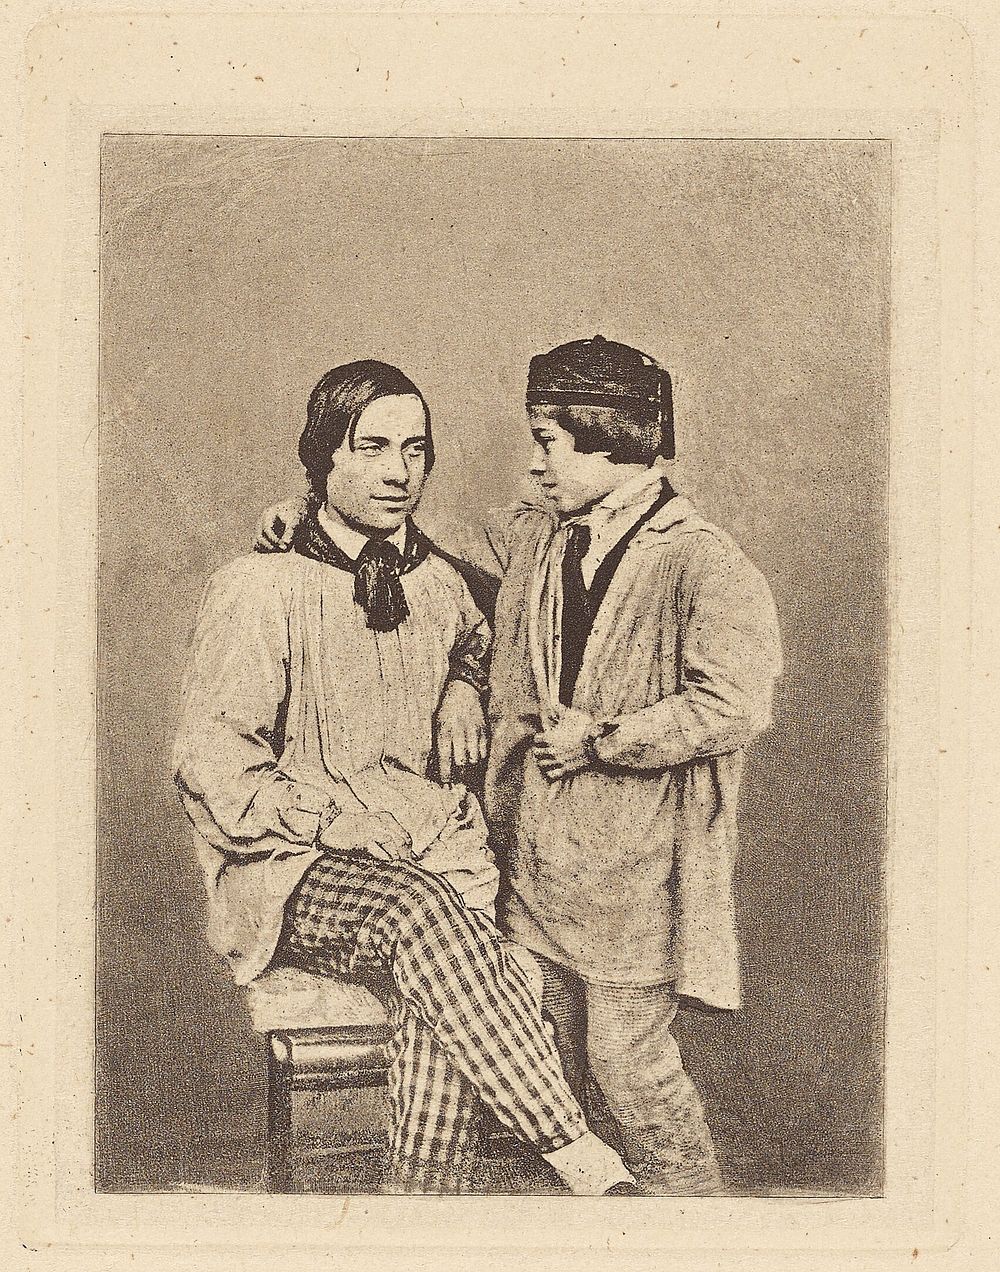 Man and boy by Armand Hippolyte Louis Fizeau and Nöel Marie Paymal Lerebours